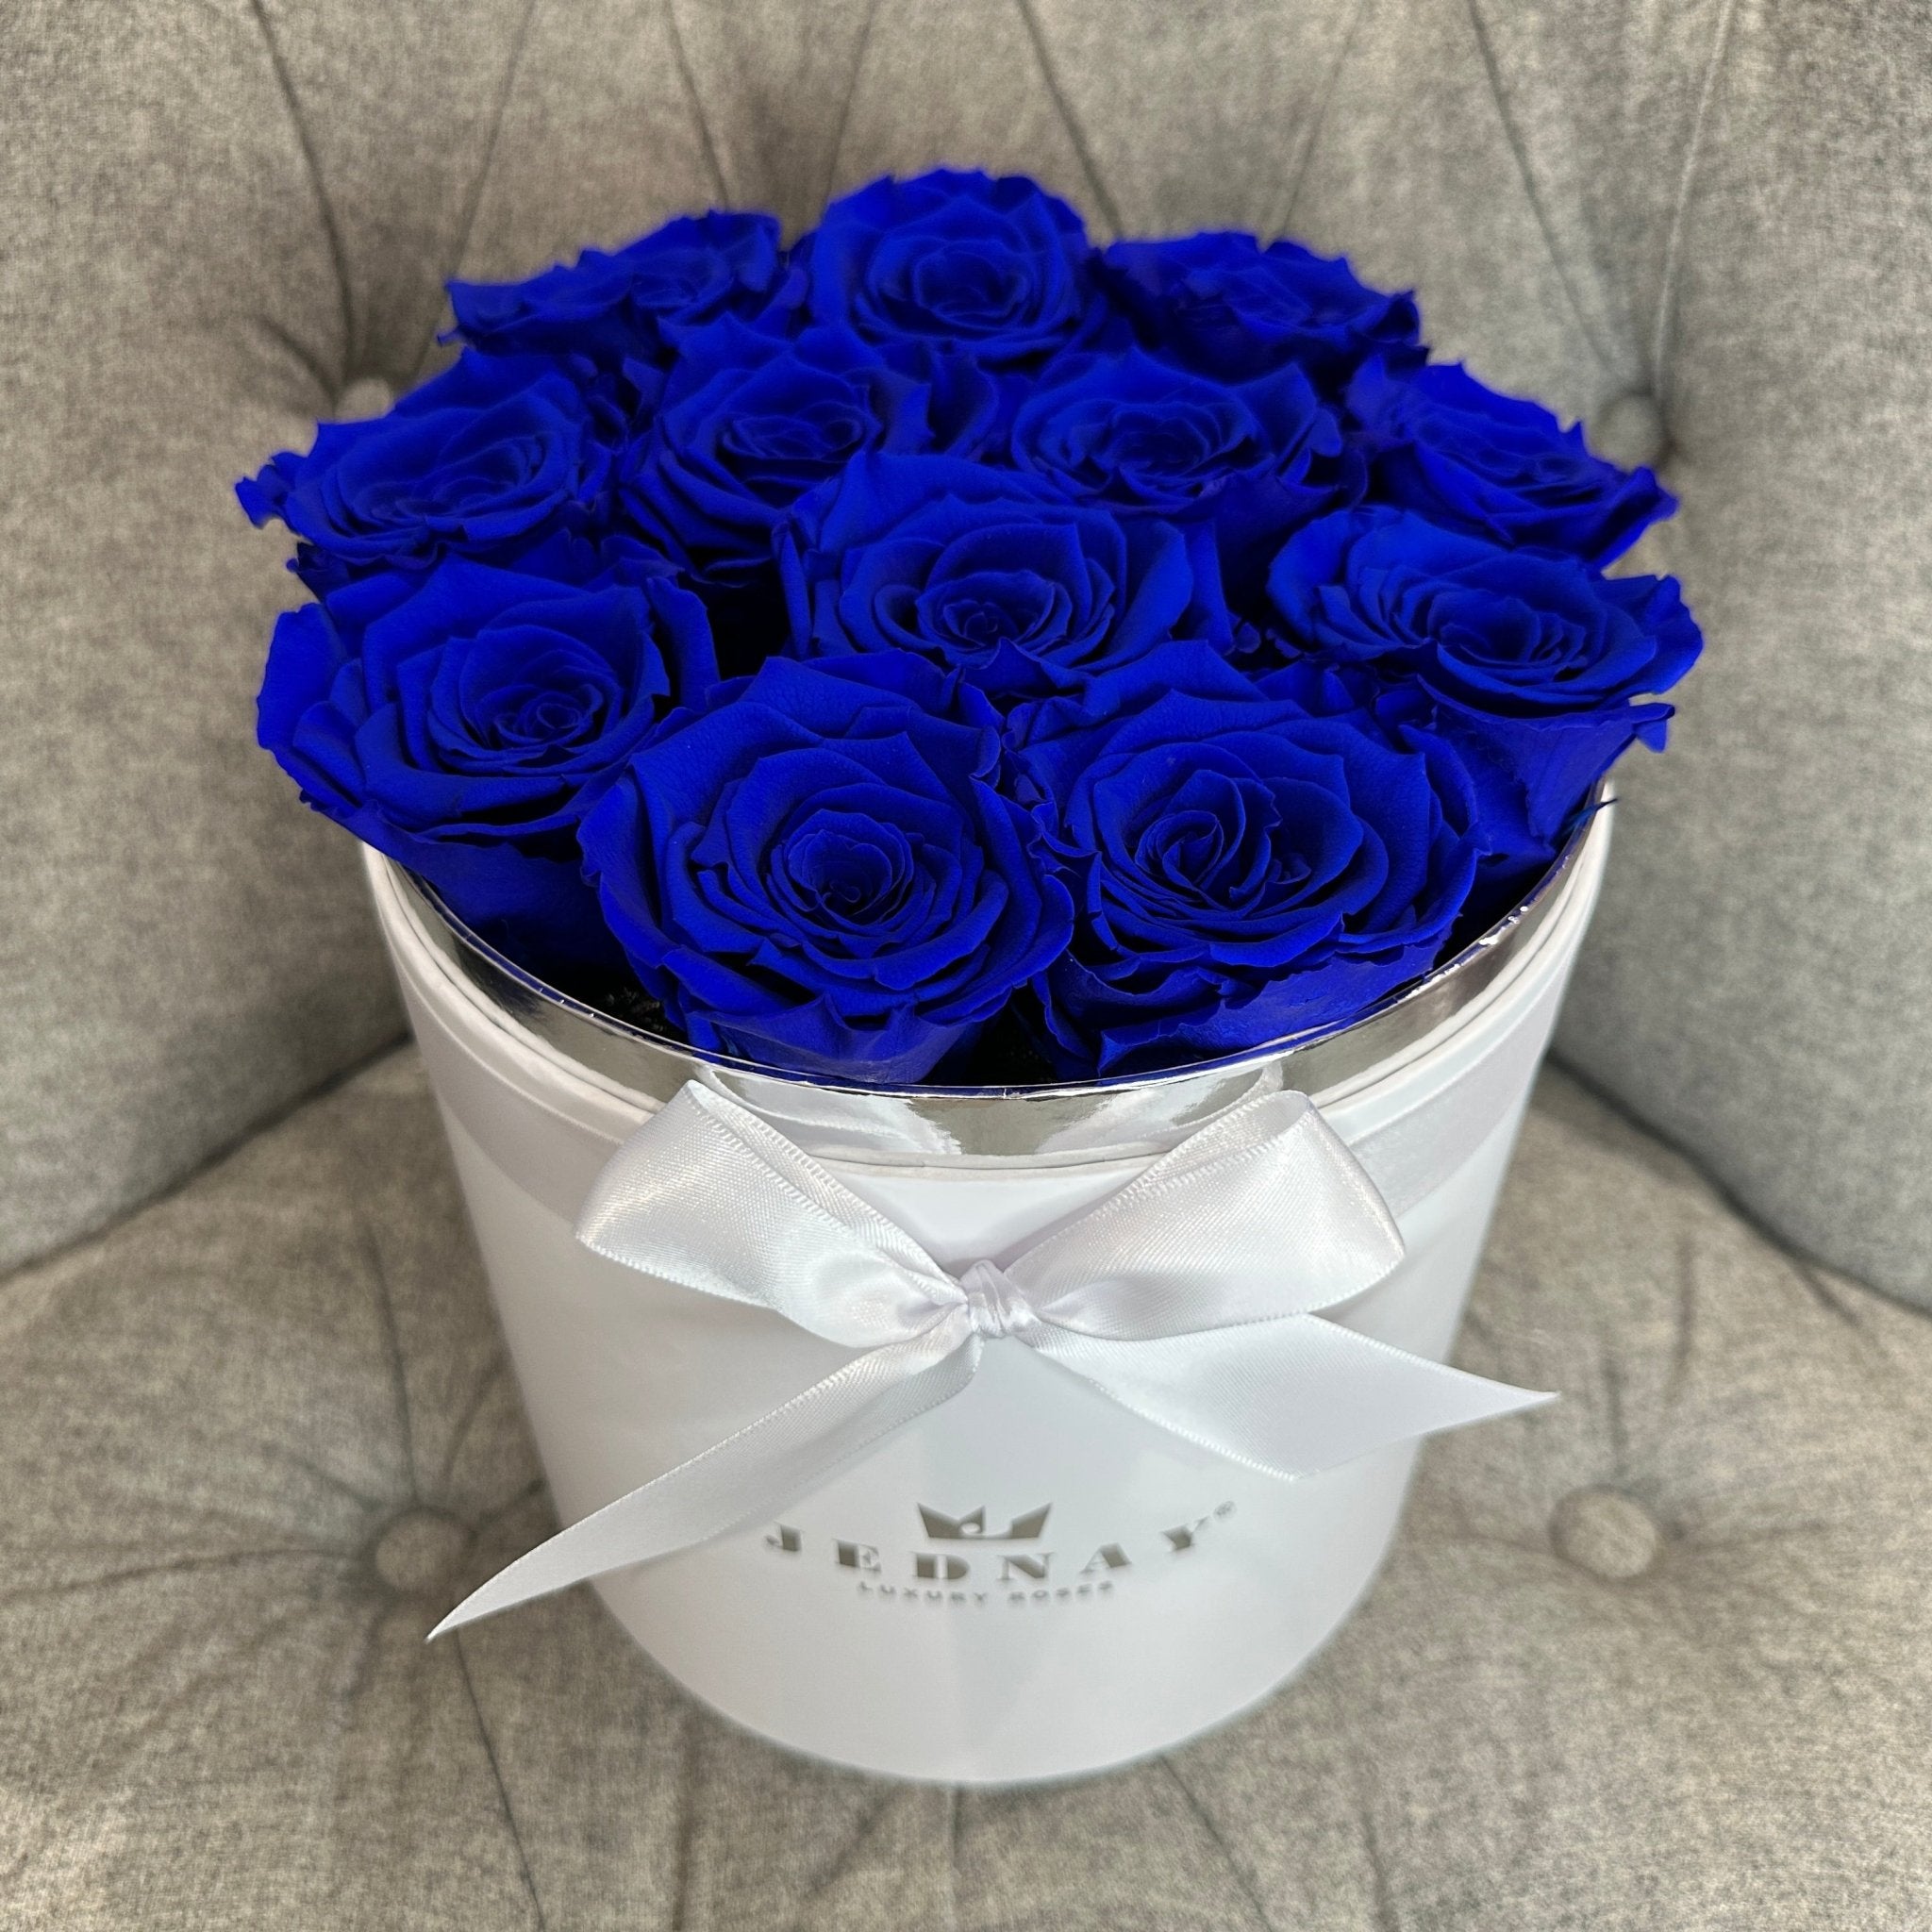 Large Classic White Forever Rose Box - Deep Blue Sea Eternal Roses - Jednay Roses